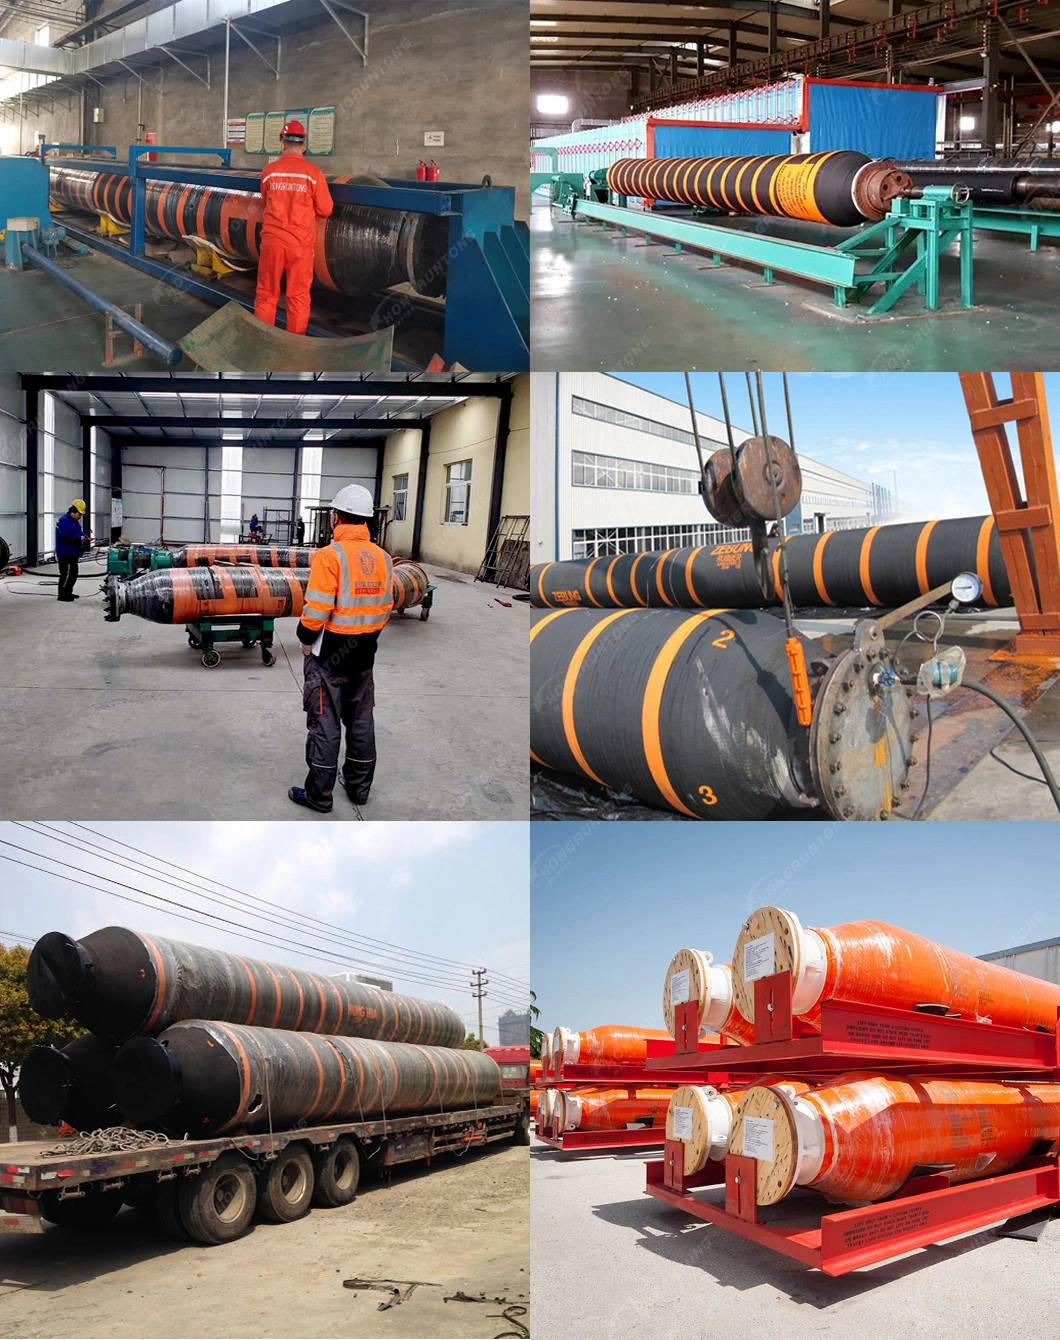 2022 Factory Supply Discount Price OCIMF2009 Floating Oil Hose of Tanker Rail